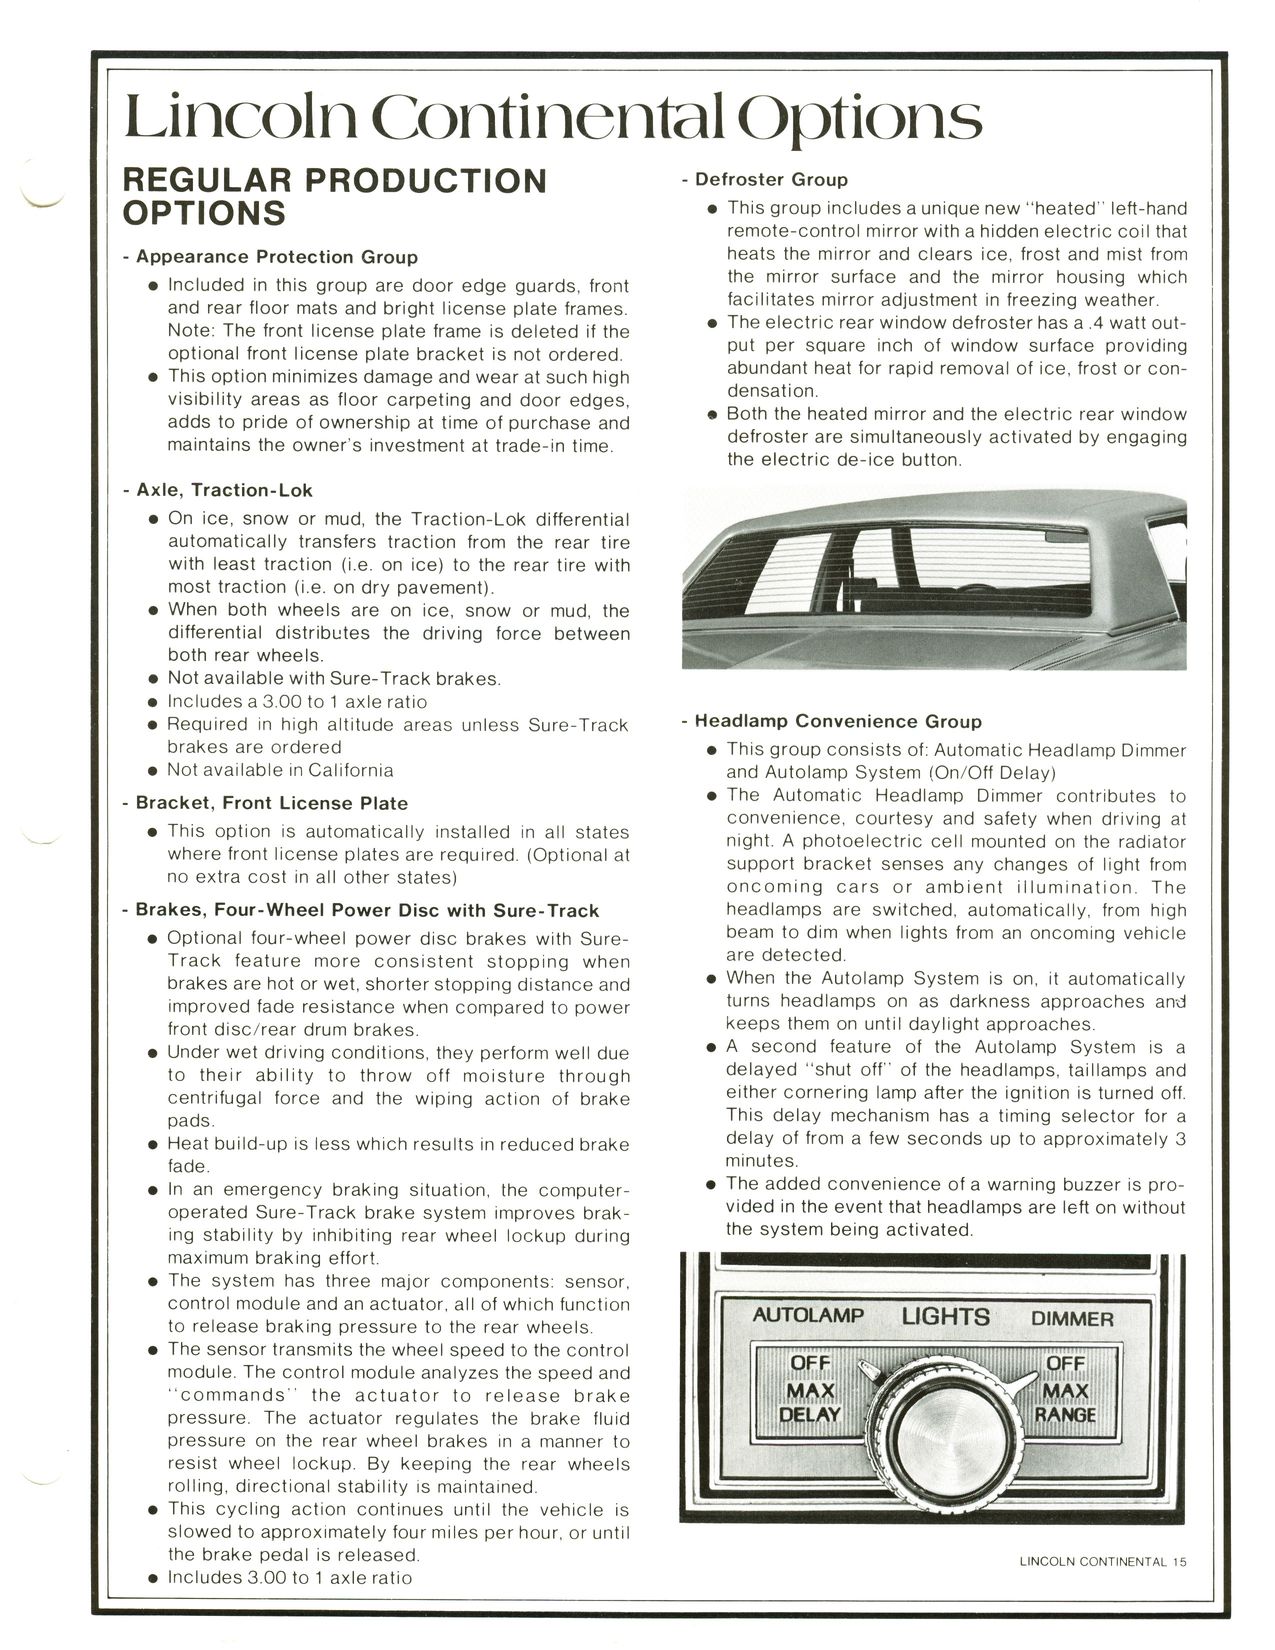 1977 Lincoln Continental Mark V Product Facts Book Page 10